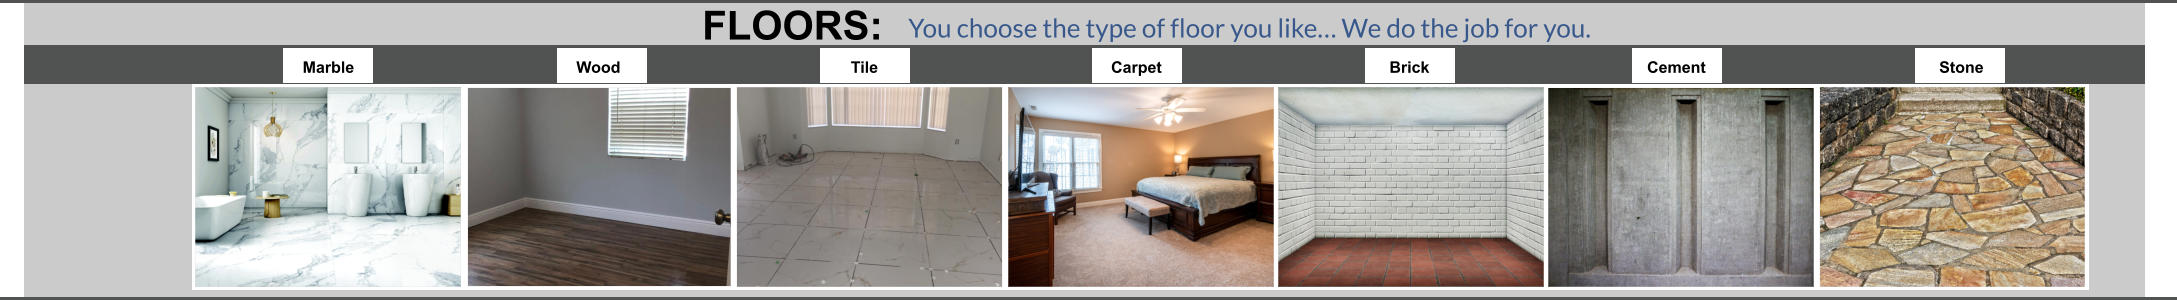 You choose the type of floor you like… We do the job for you. Marble Wood Tile Carpet Brick Cement Stone FLOORS: